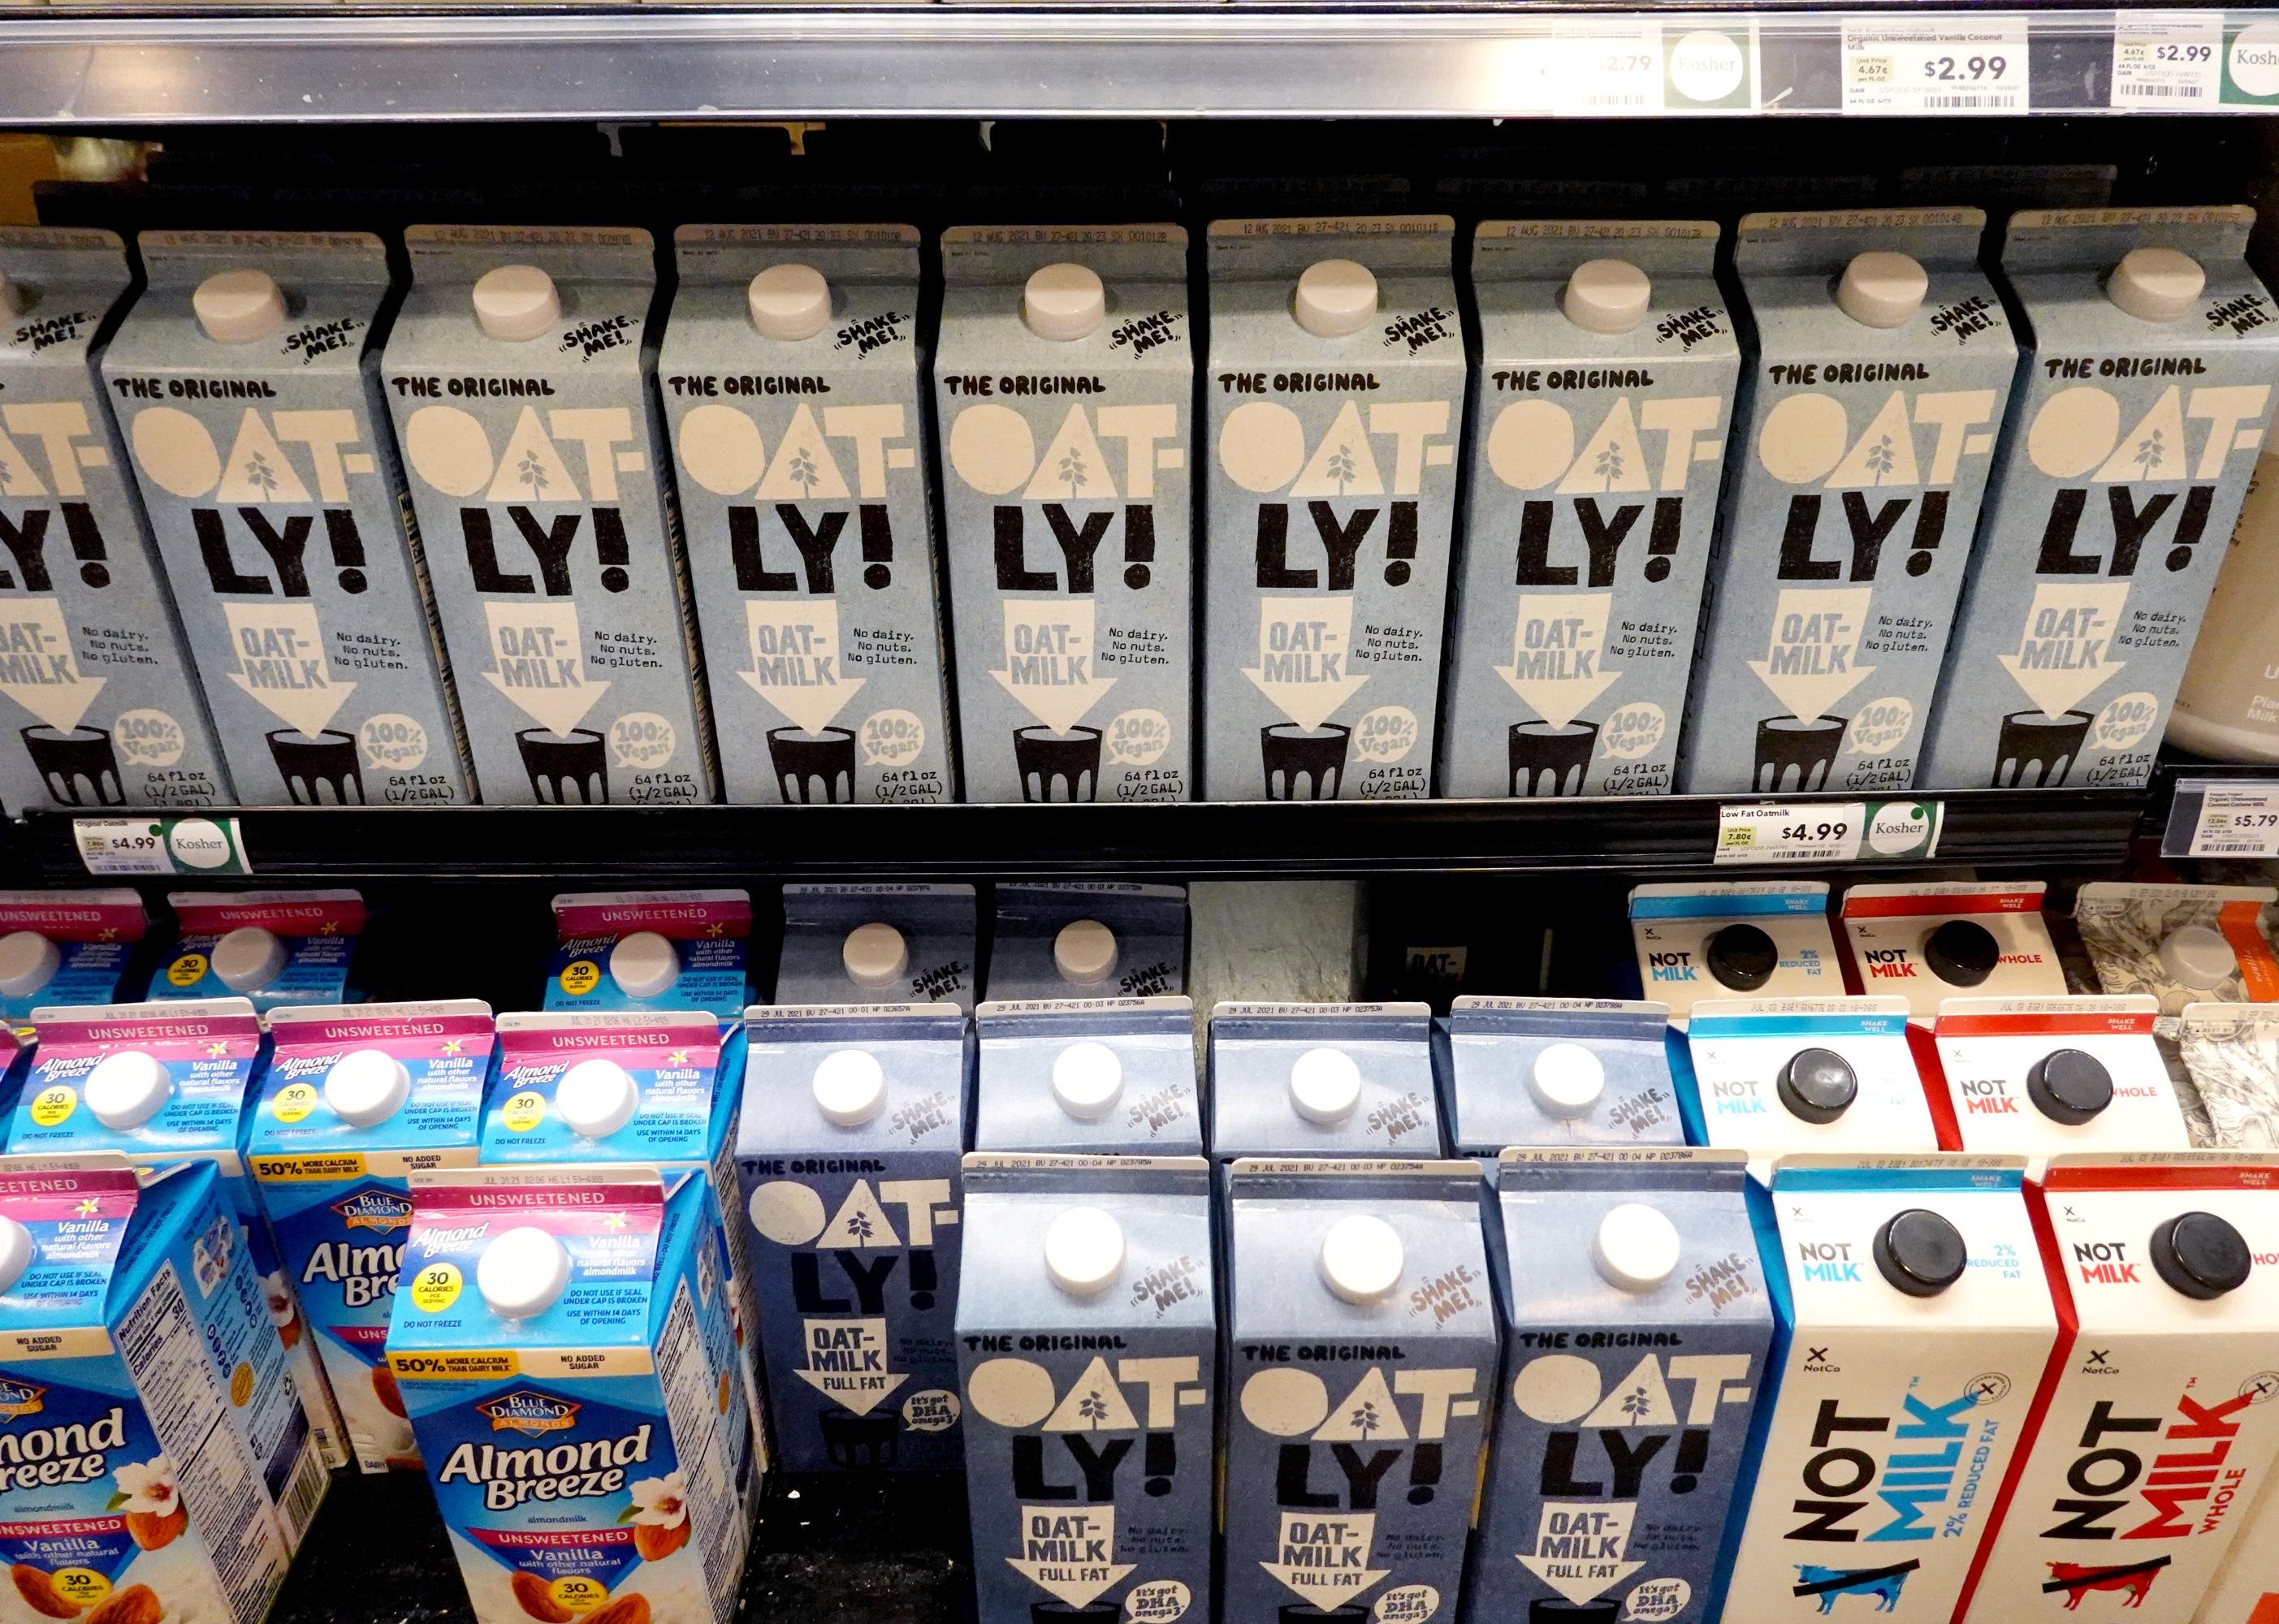 Containers of oat milk on display in store.